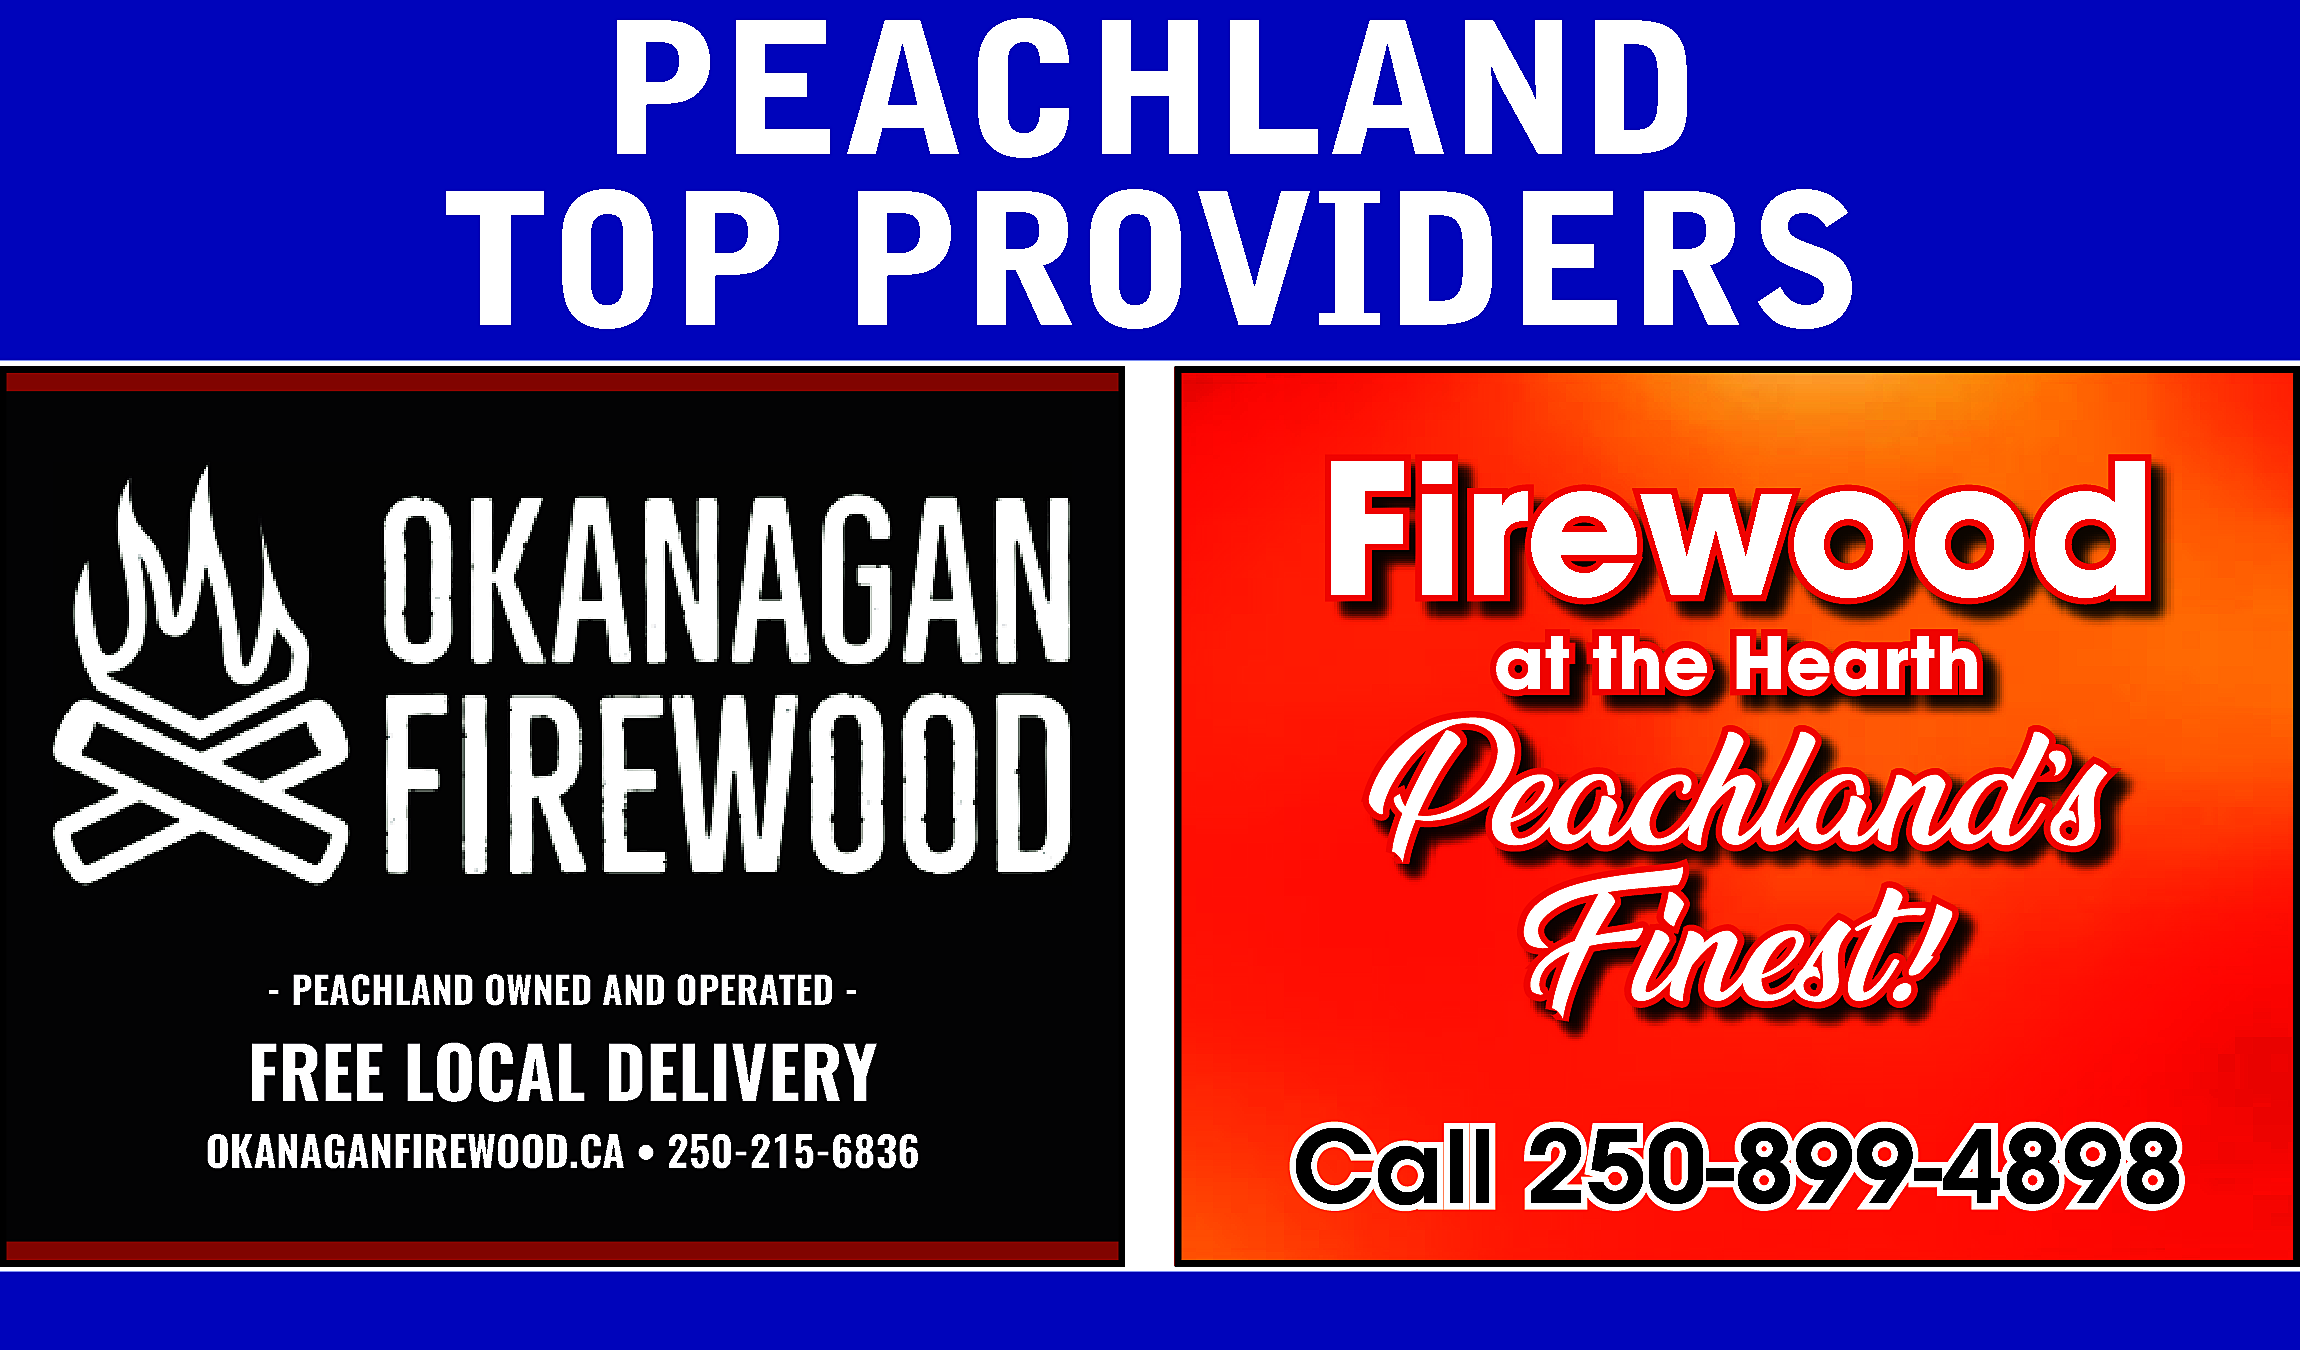 PEACHLAND <br>TOP PROVIDERS <br>Firewood <br>at  PEACHLAND  TOP PROVIDERS  Firewood  at the Hearth    - PEACHLAND OWNED AND OPERATED -    FREE LOCAL DELIVERY  www.okanaganfirewood.ca/  OKANAGANFIREWOOD.CA • 250-215-6836    Peachland’s  Finest!!  Finest  Call 250-899-4898    